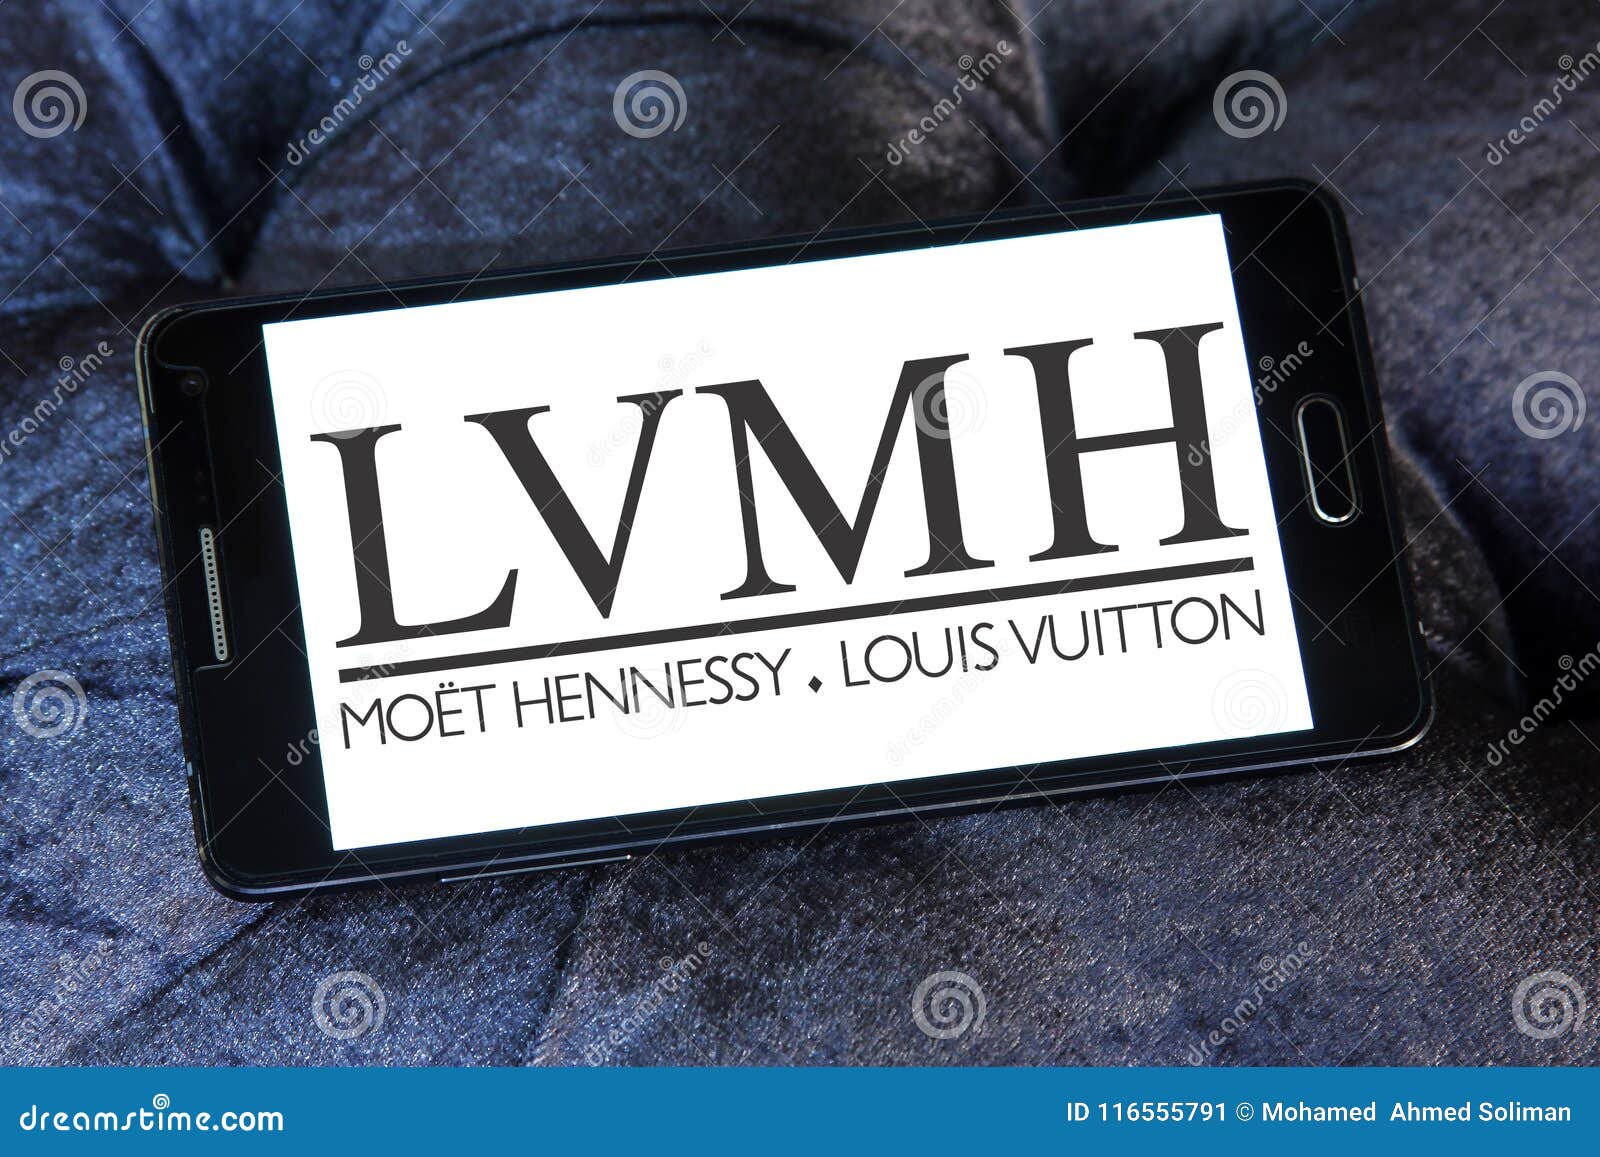 moet louis vuitton hennessy